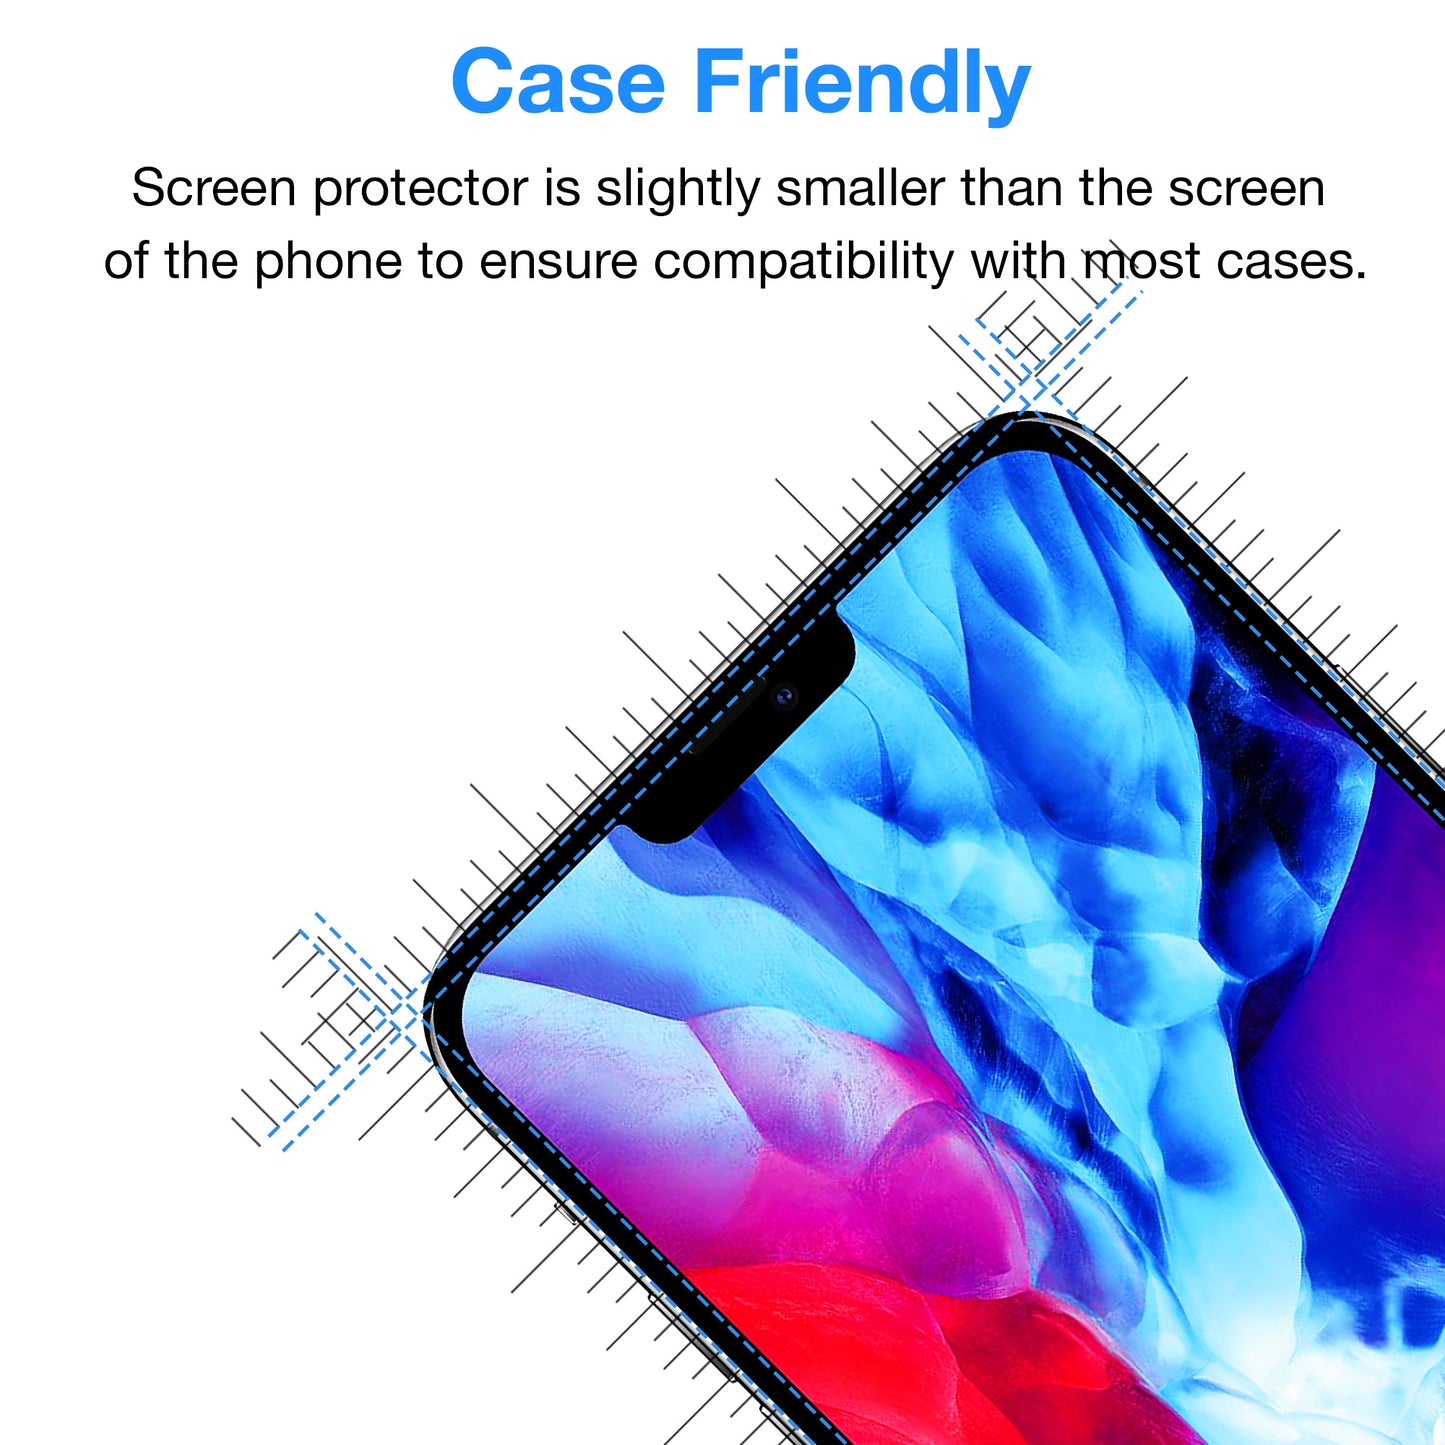 [3 Pack] MEZON Ultra Clear Film for iPhone 13 Mini (5.4") Premium Case Friendly Screen Protector